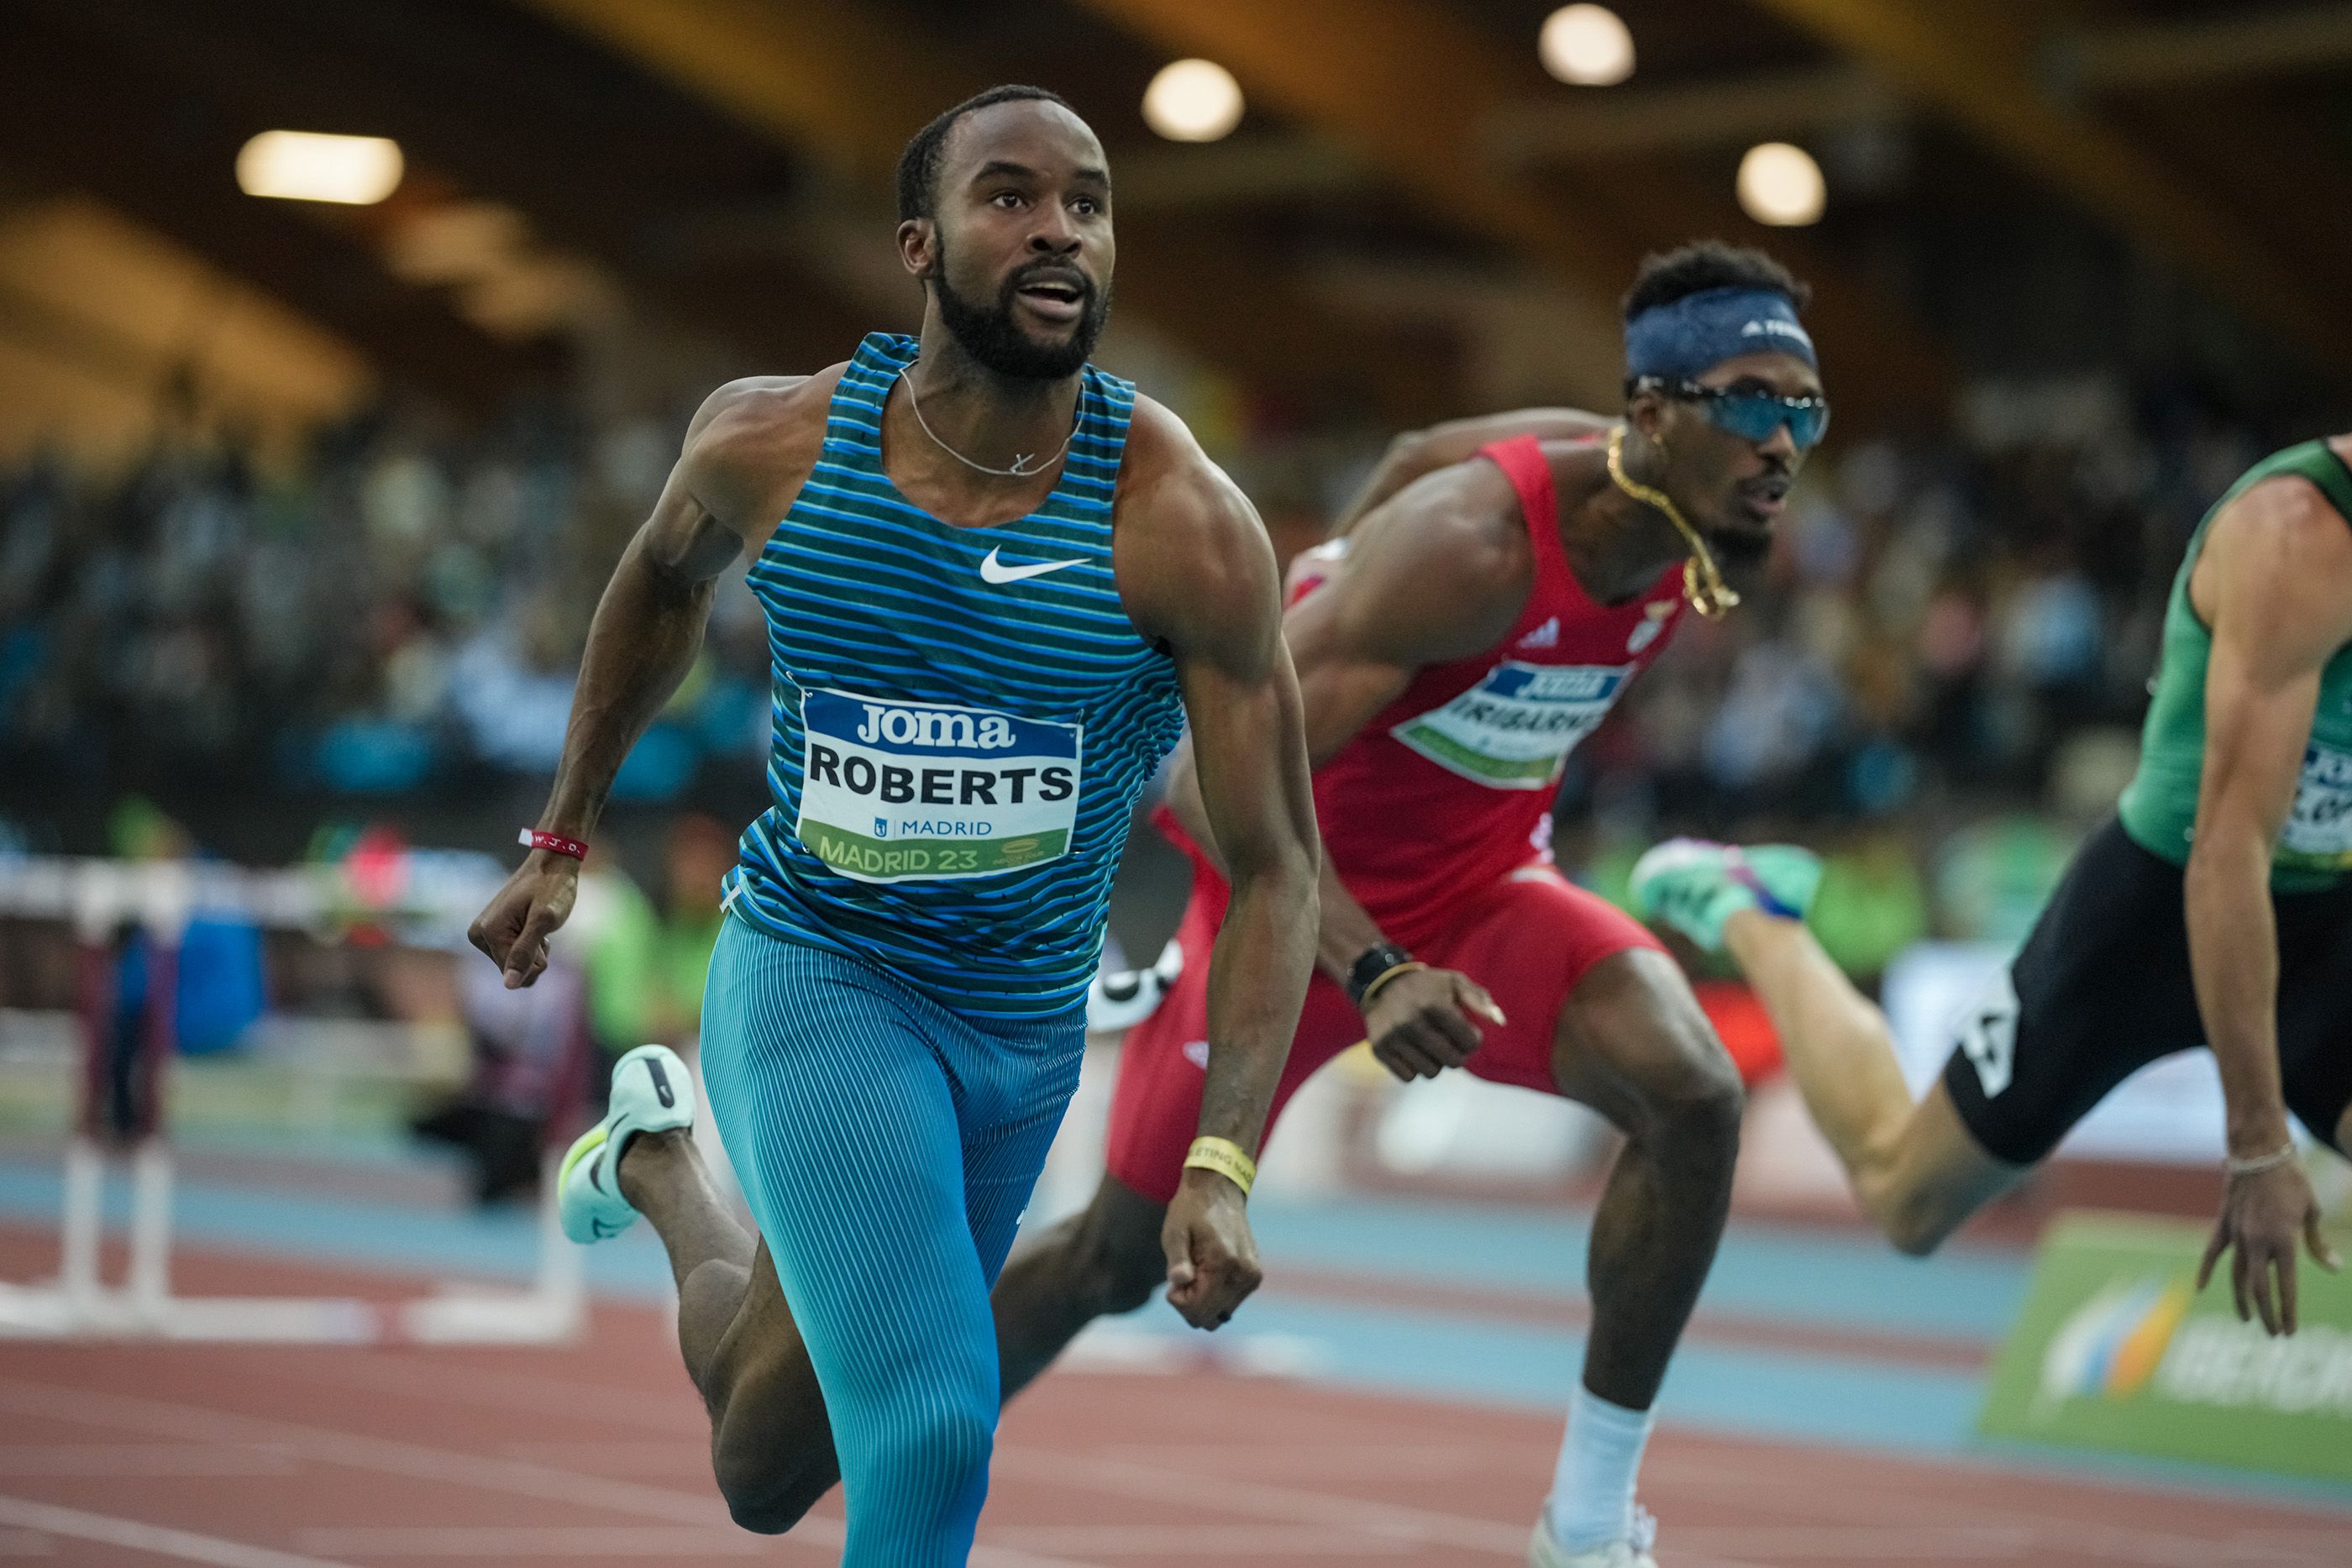 Daniel Roberts wins the 60m hurdles at the World Indoor Tour Gold meeting in Madrid